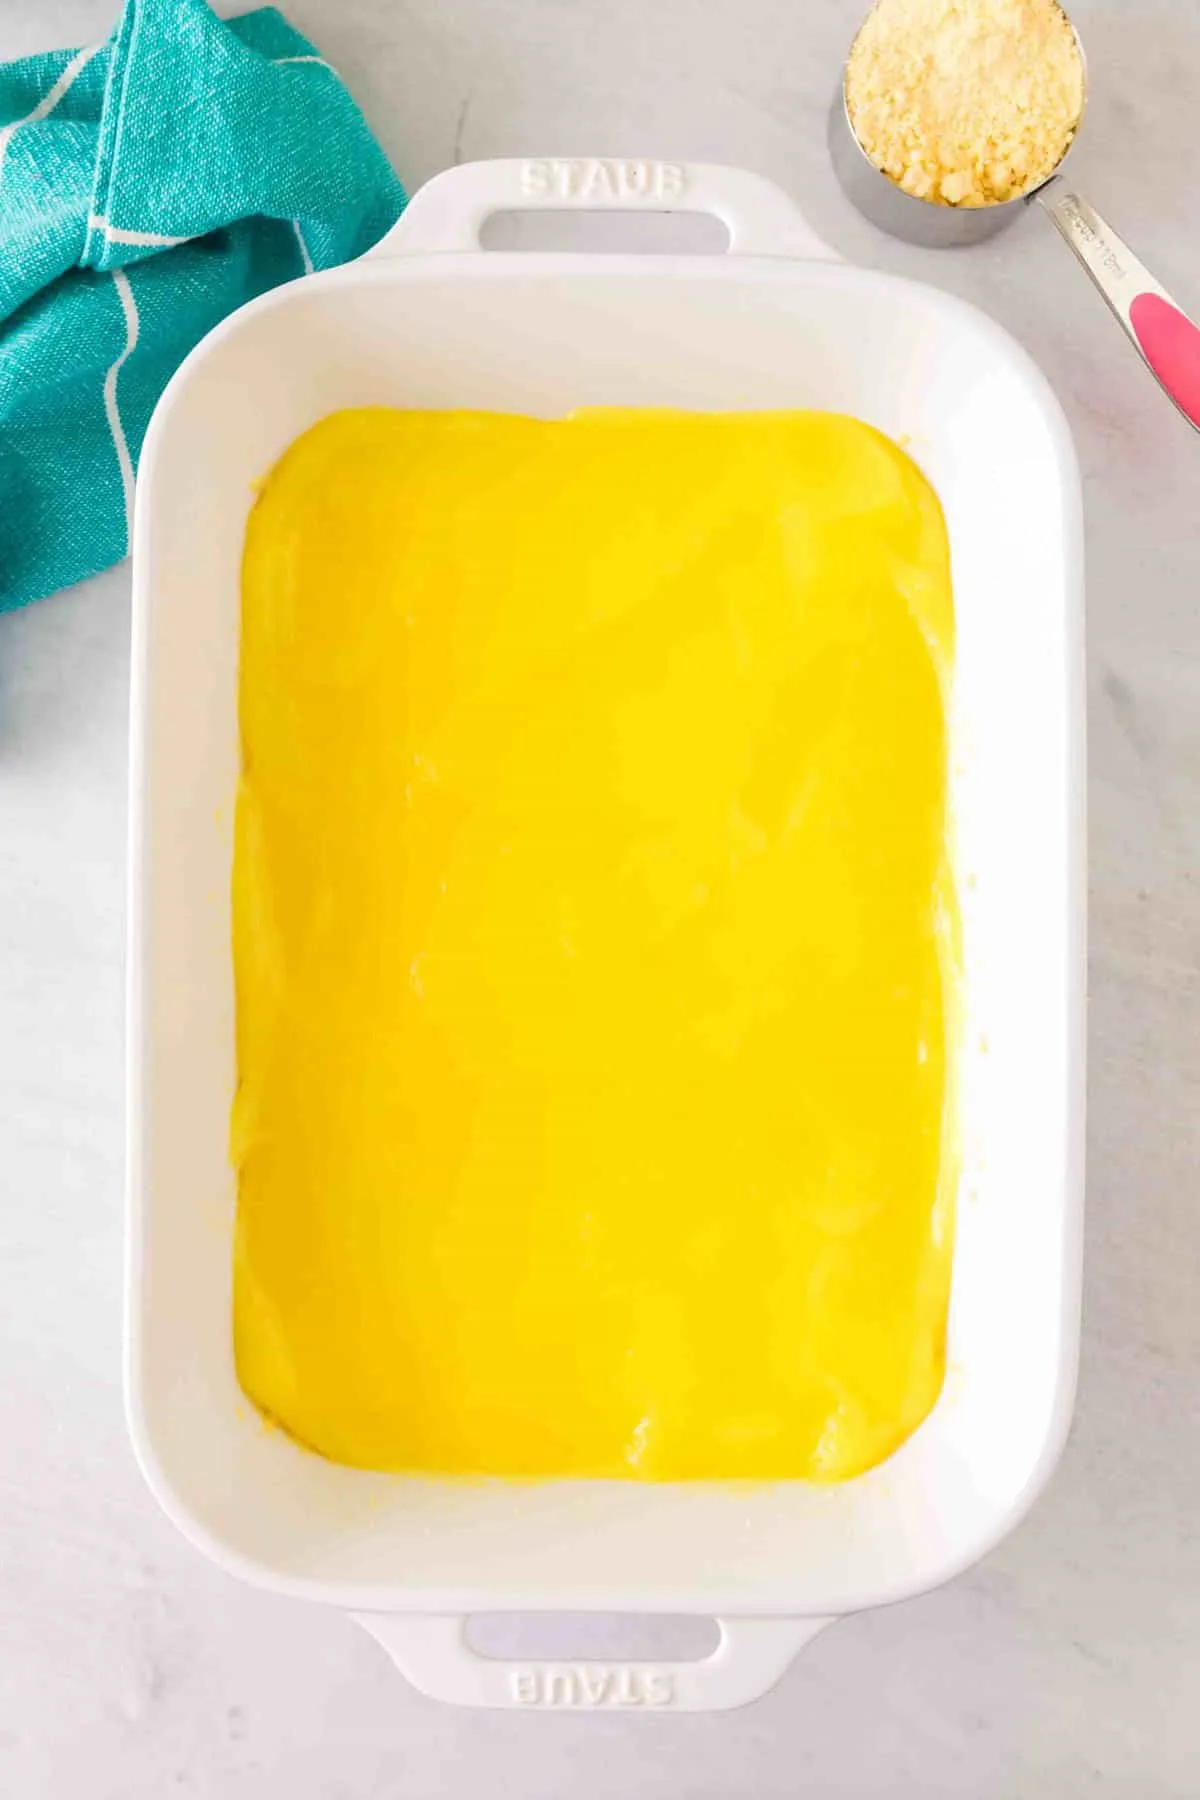 lemon pie filling spread over buttery cake mix crust in a baking dish